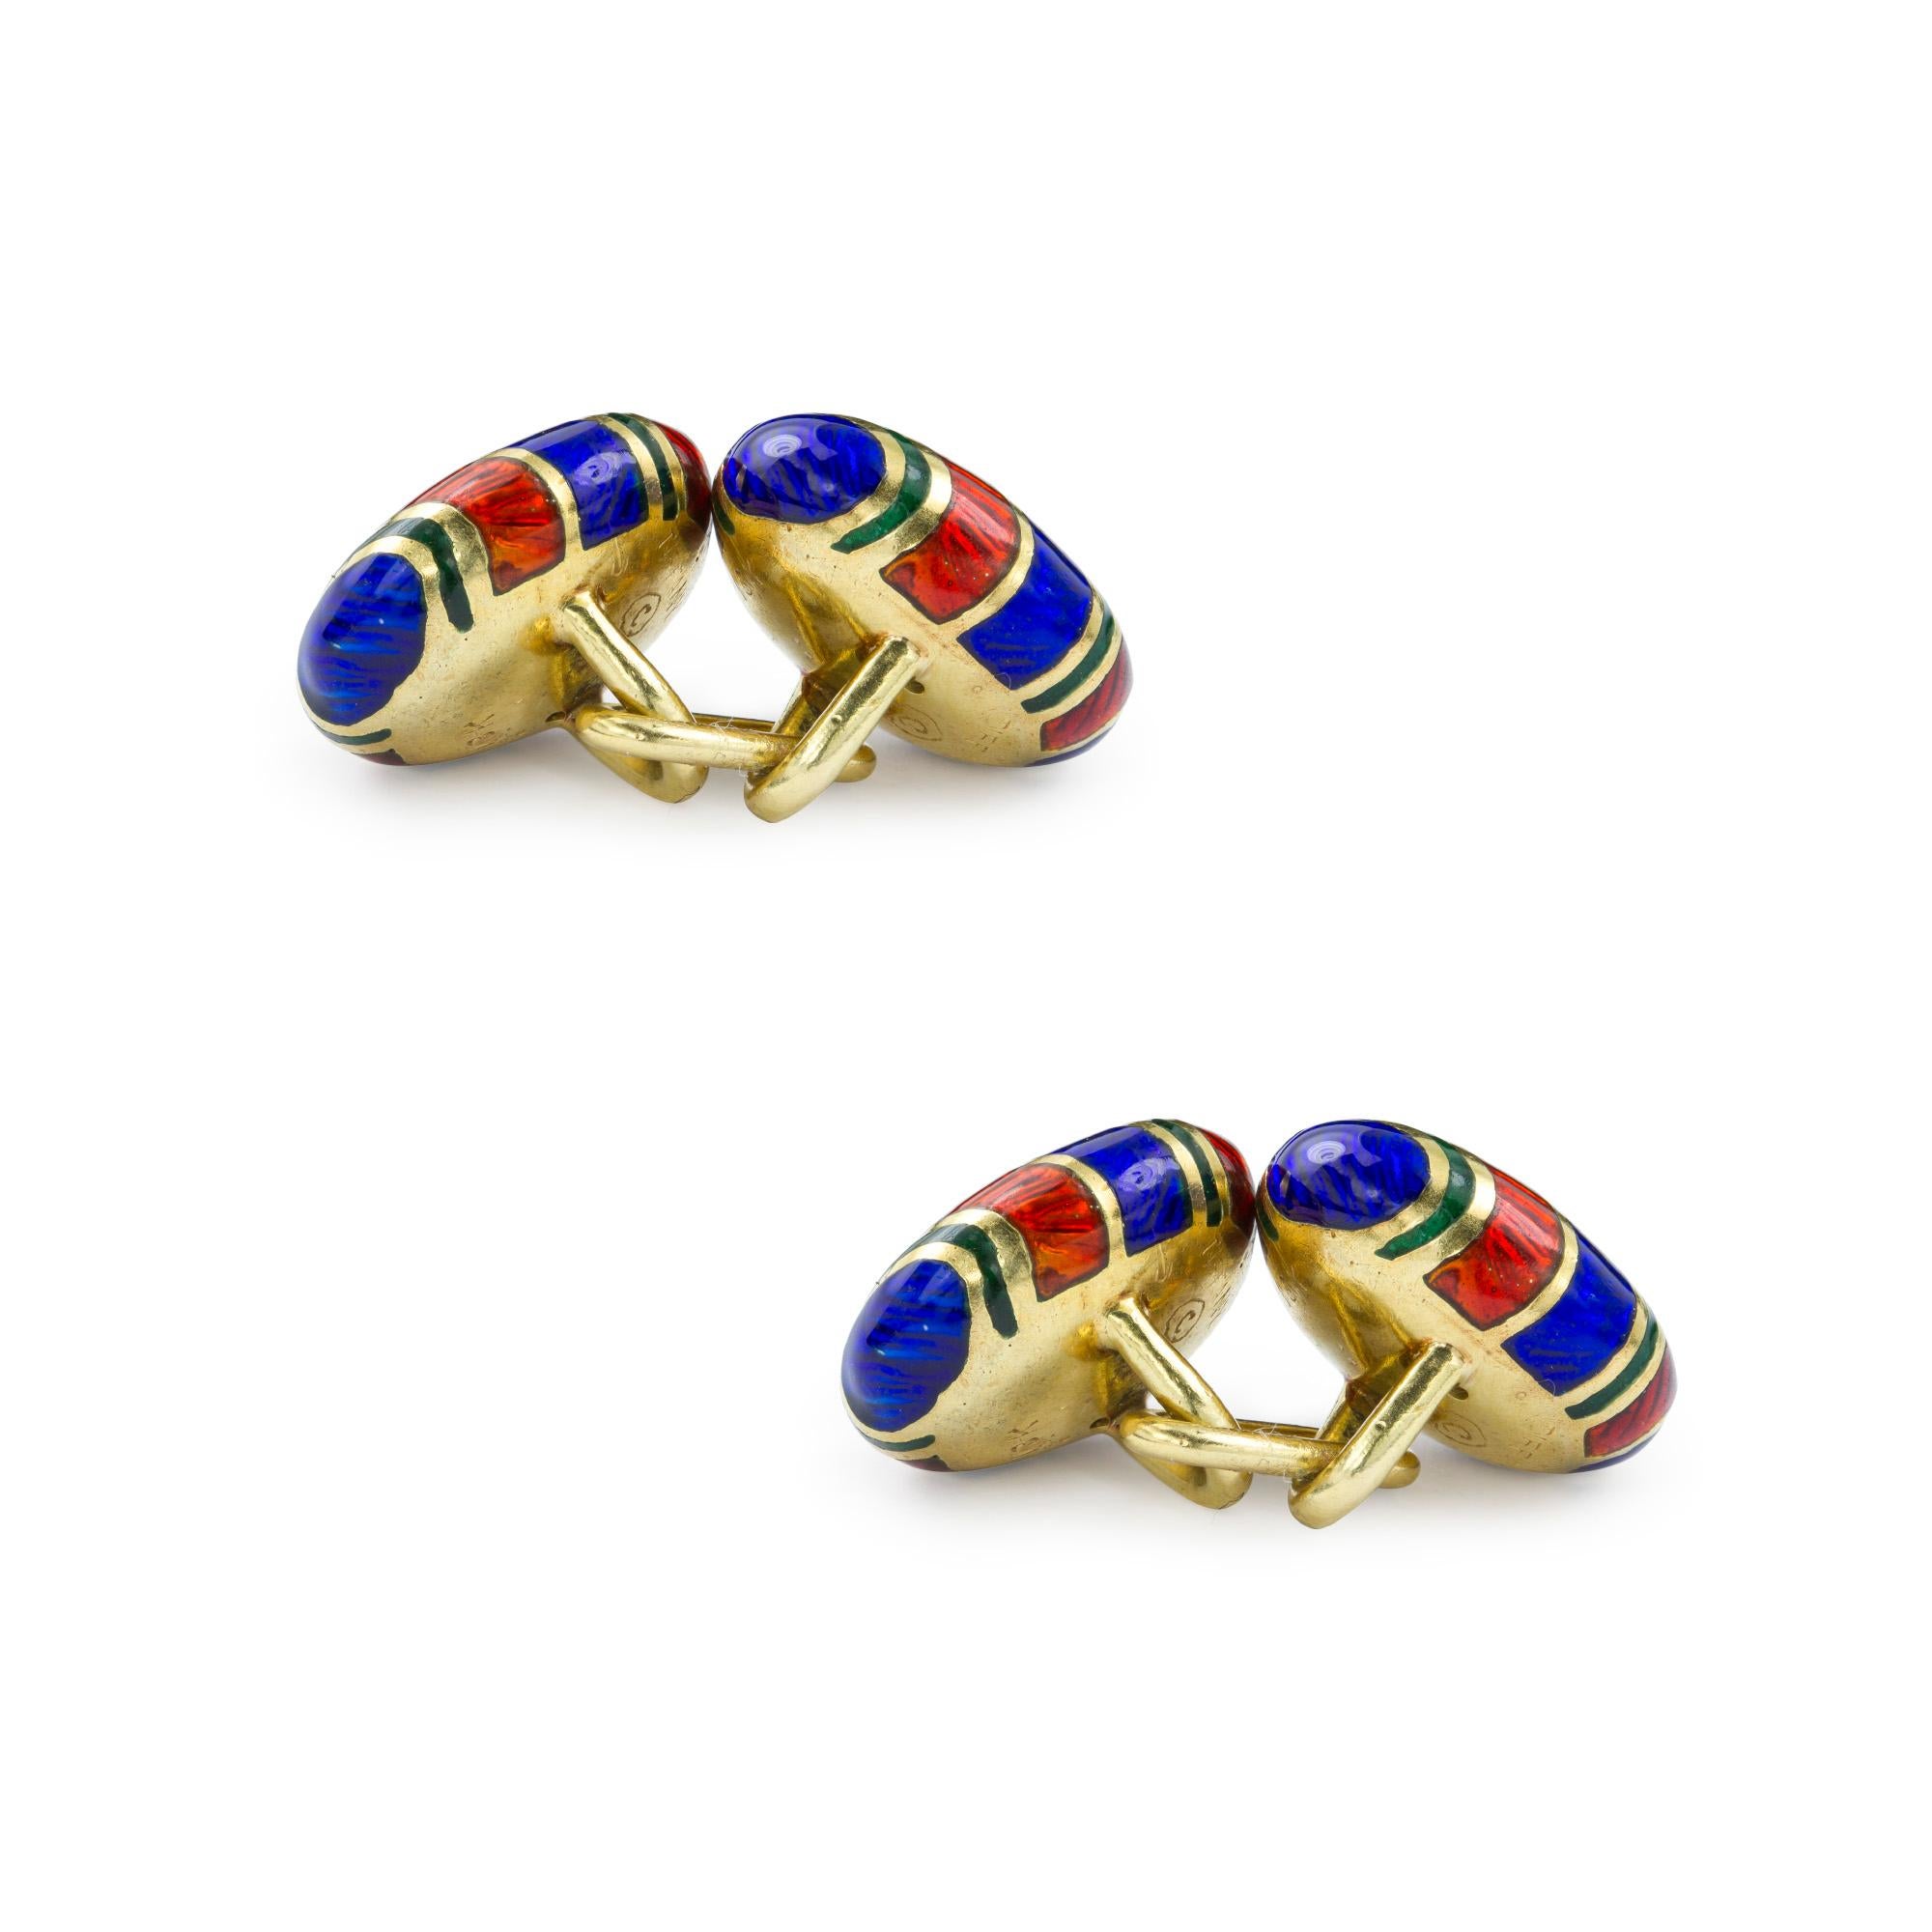 A pair of Tiffany & Co. yellow gold and enamel cufflinks,each link comprising two oval domed faces, enamelled with red, green and blue stripes to 18ct yellow gold, connected with a yellow gold chain link, signed Tiffany, circa 1960, each link